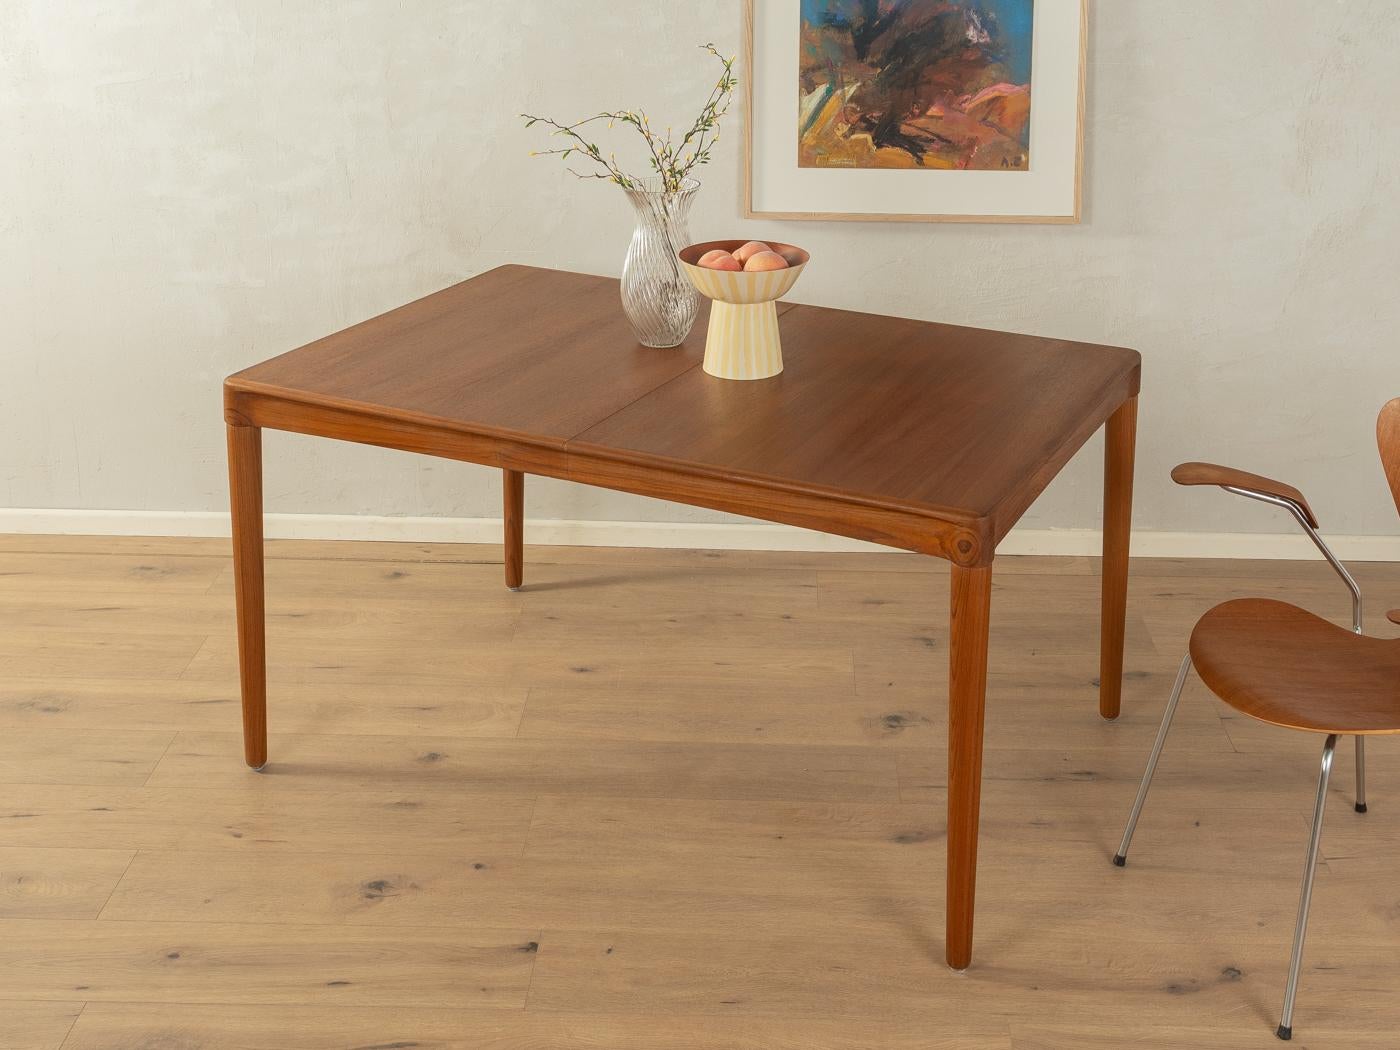 Rare extendable teak dining table from the 1960s by H.W. Klein for Bramin. Solid frame and veneered table top with solid wood edge. The extension leaf can be stowed under the table top.

Quality Features:

accomplished design: perfect proportions